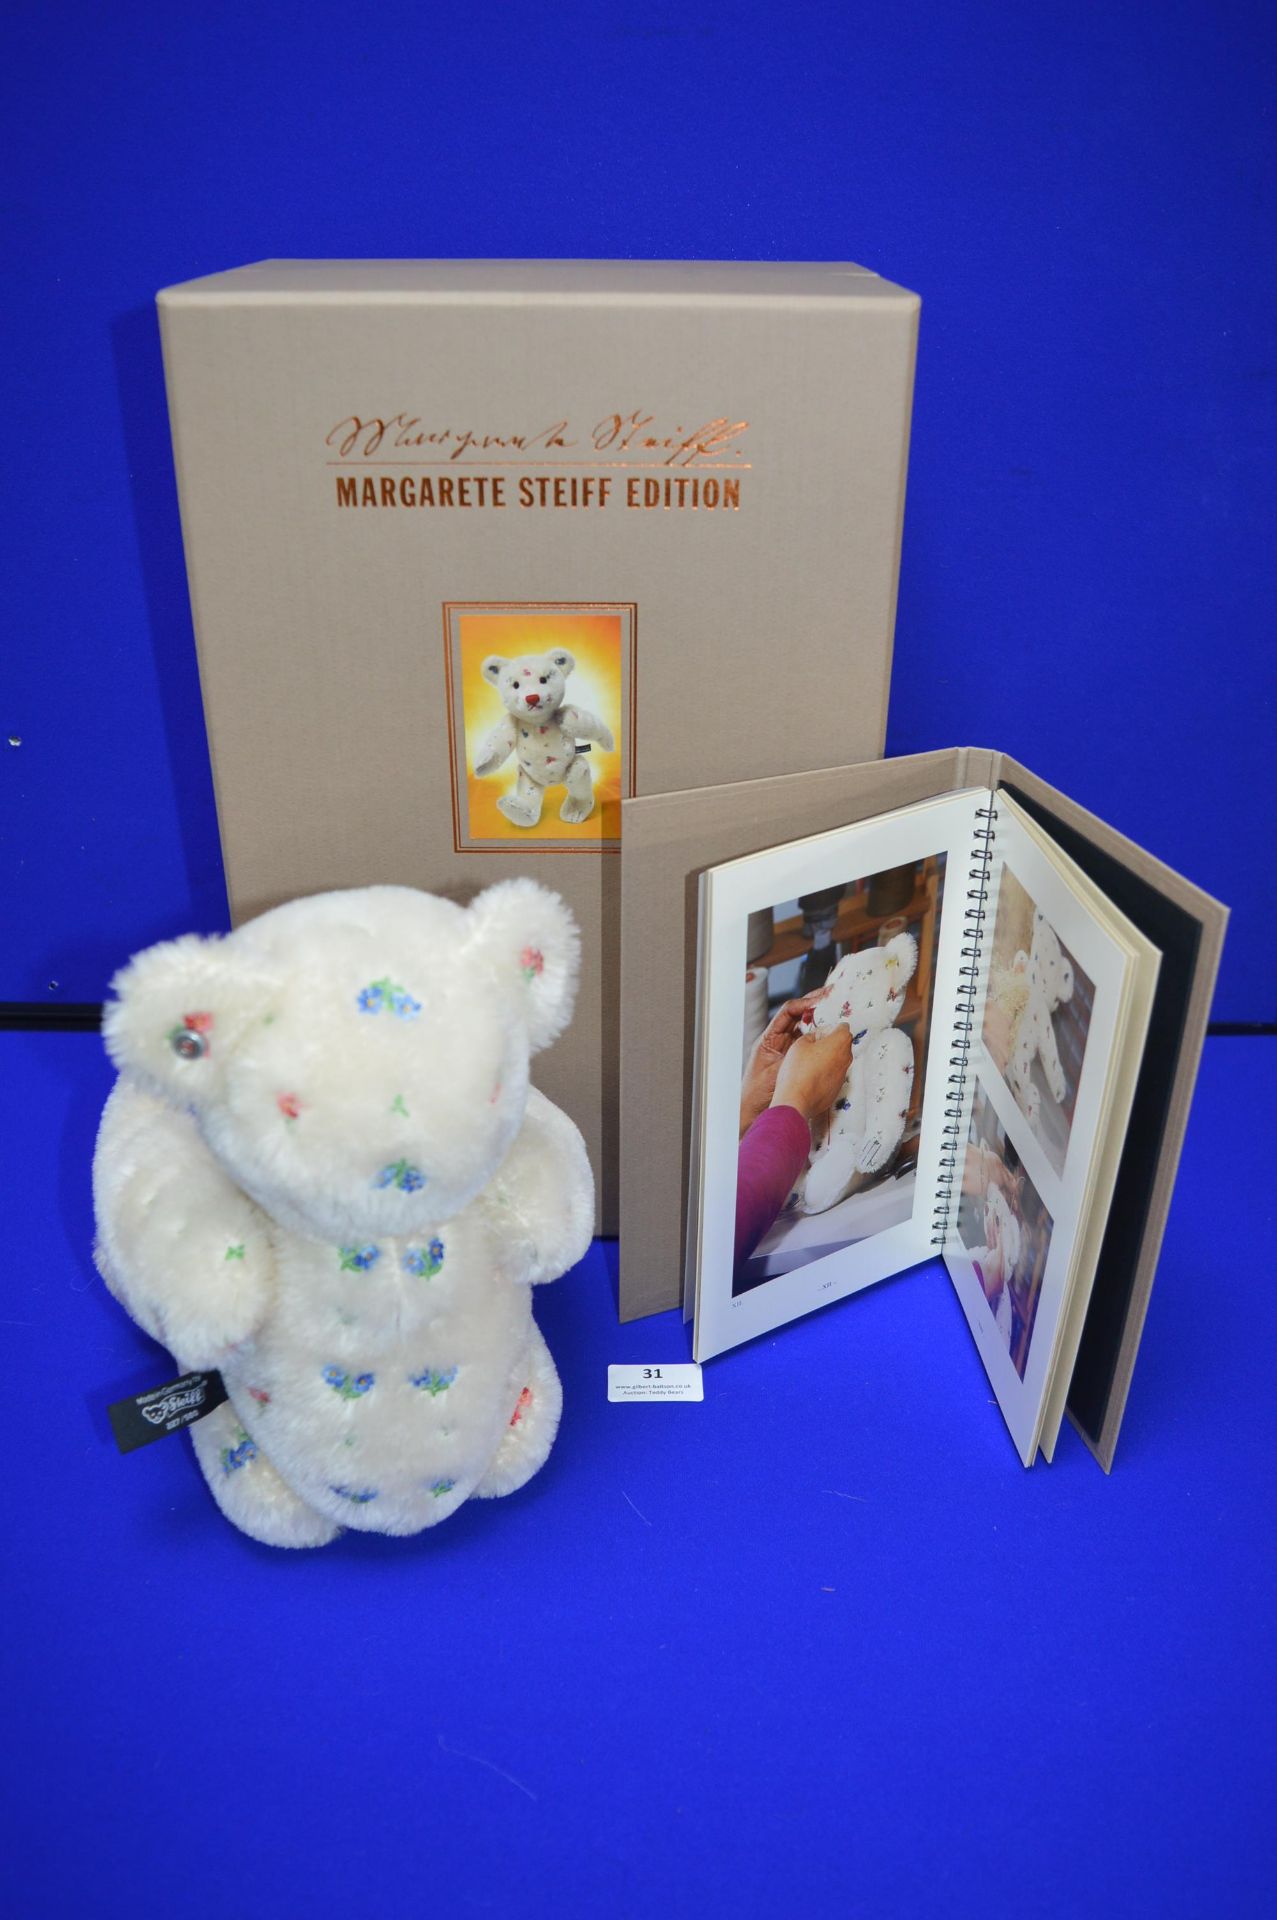 Margarete Steiff Limited Edition No.227 of 500 Teddy Bear - Image 2 of 5